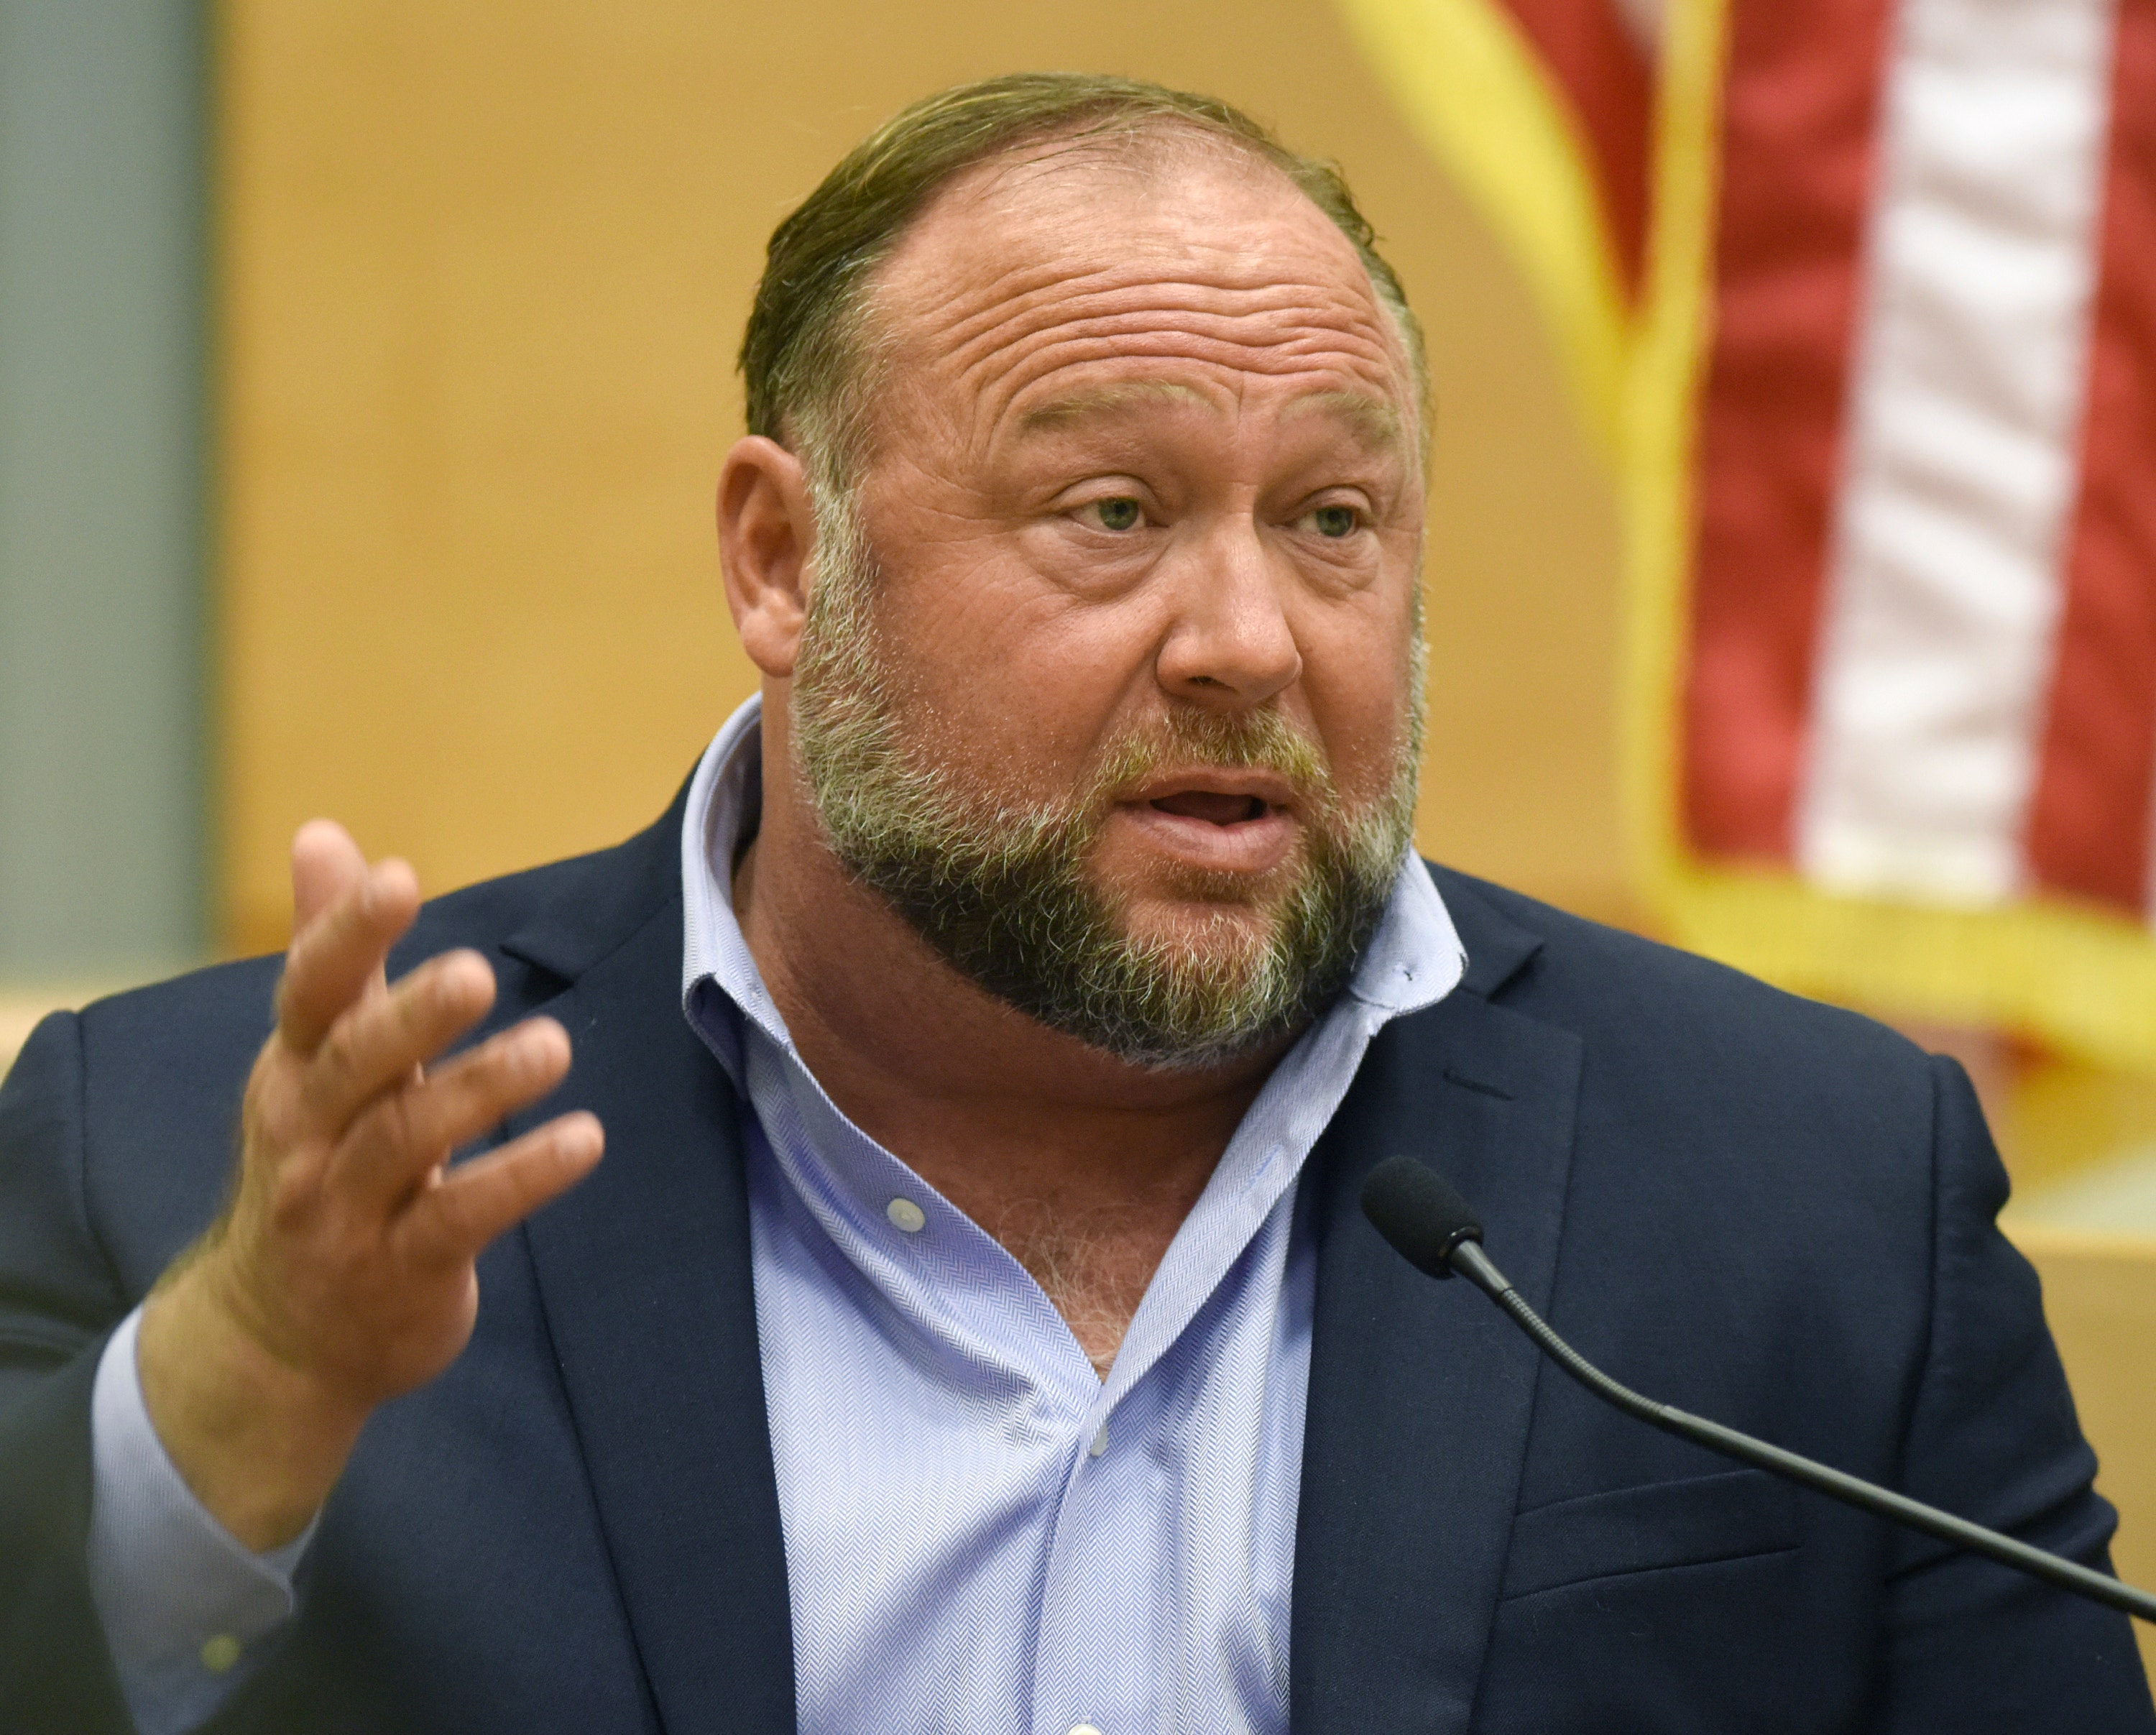 Alex Jones criticized for spending $93K in July as Sandy Hook families owed $1.5B have yet to see a dime